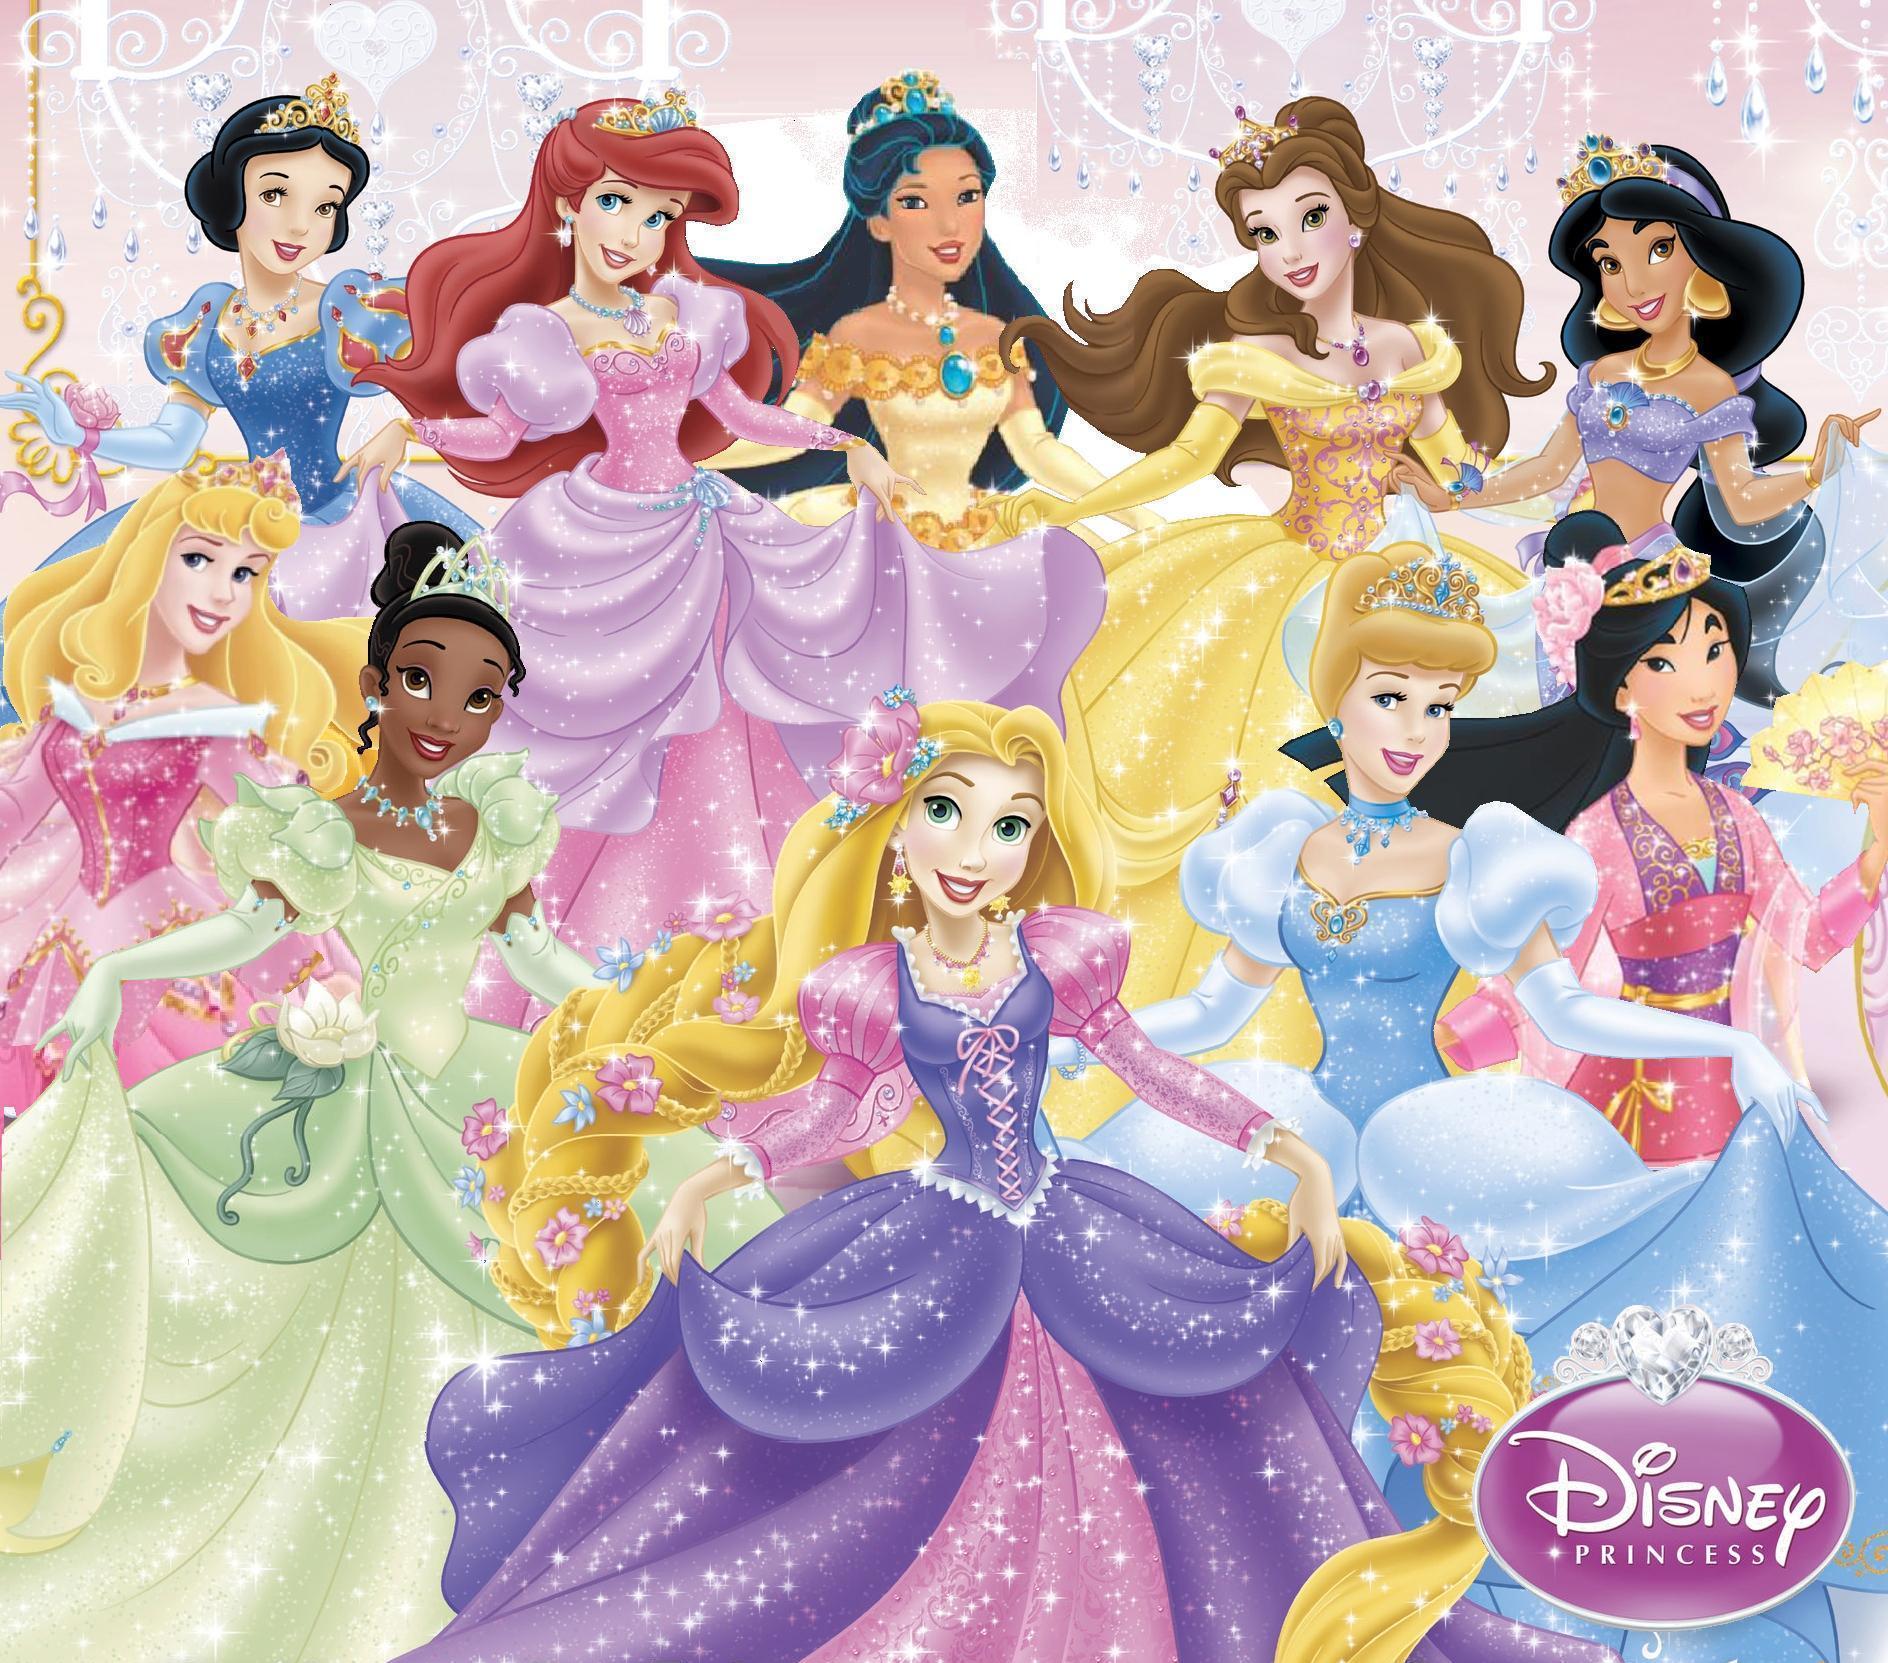 Which Princess look best in the DP Ultimate Guide to the